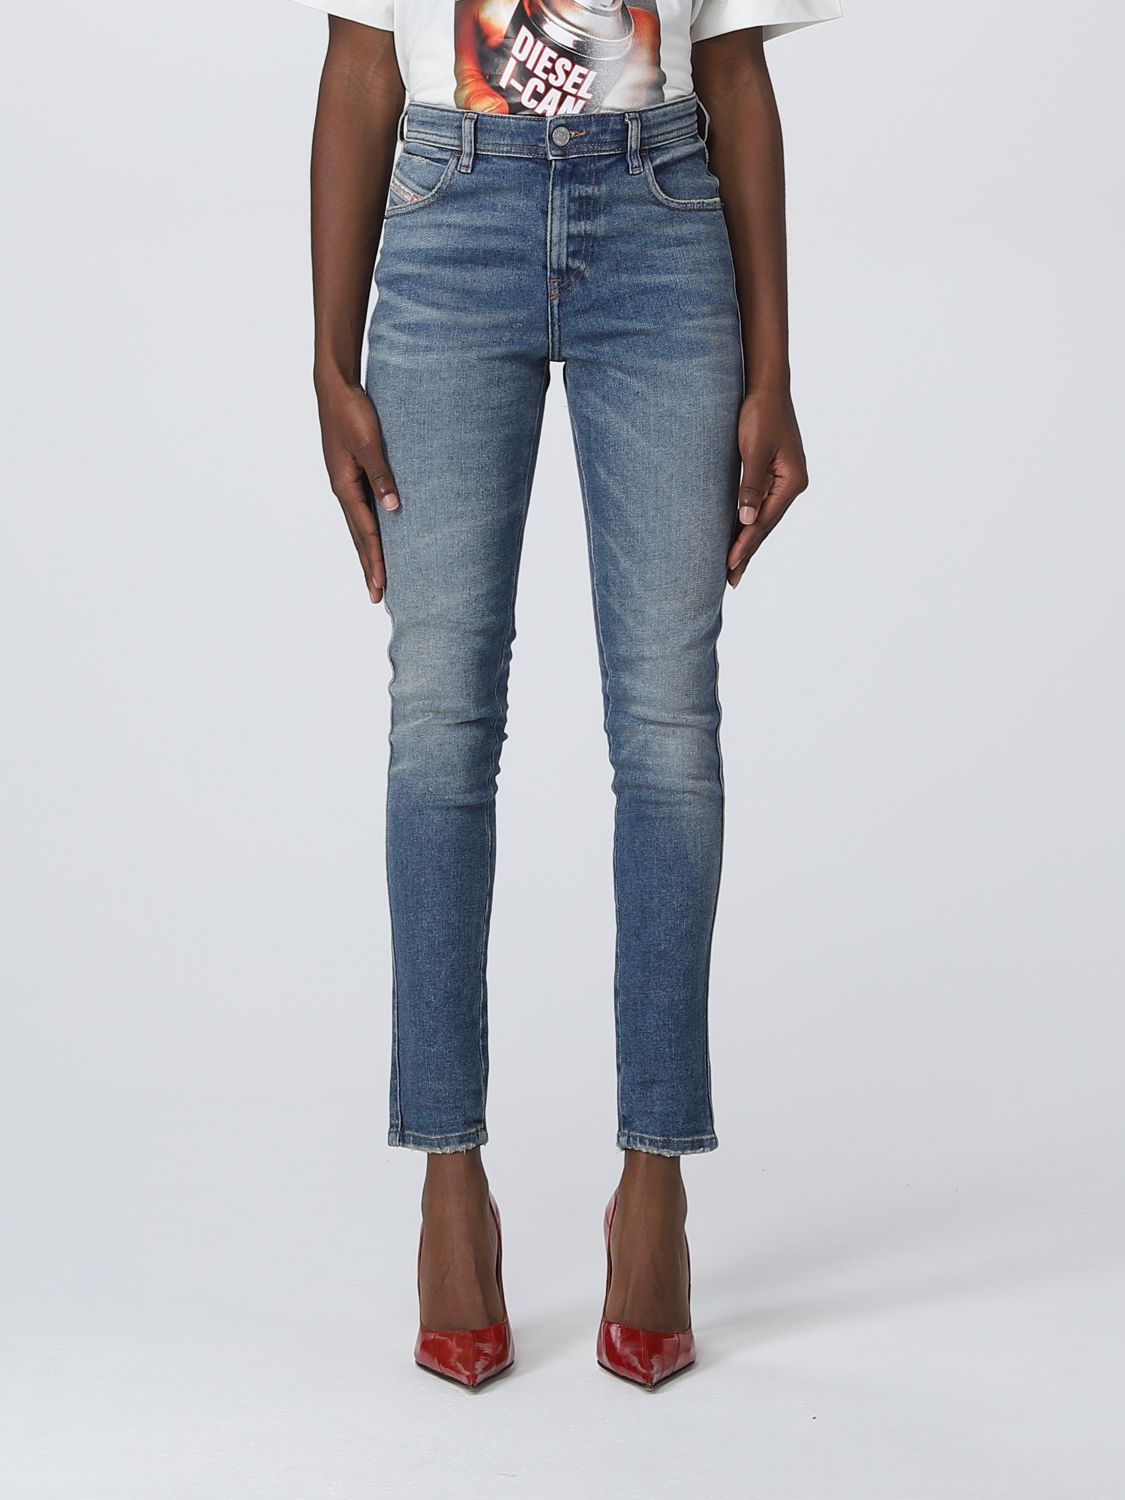 DIESEL: jeans for woman - Denim | Diesel jeans A0360409E88 on GIGLIO.COM